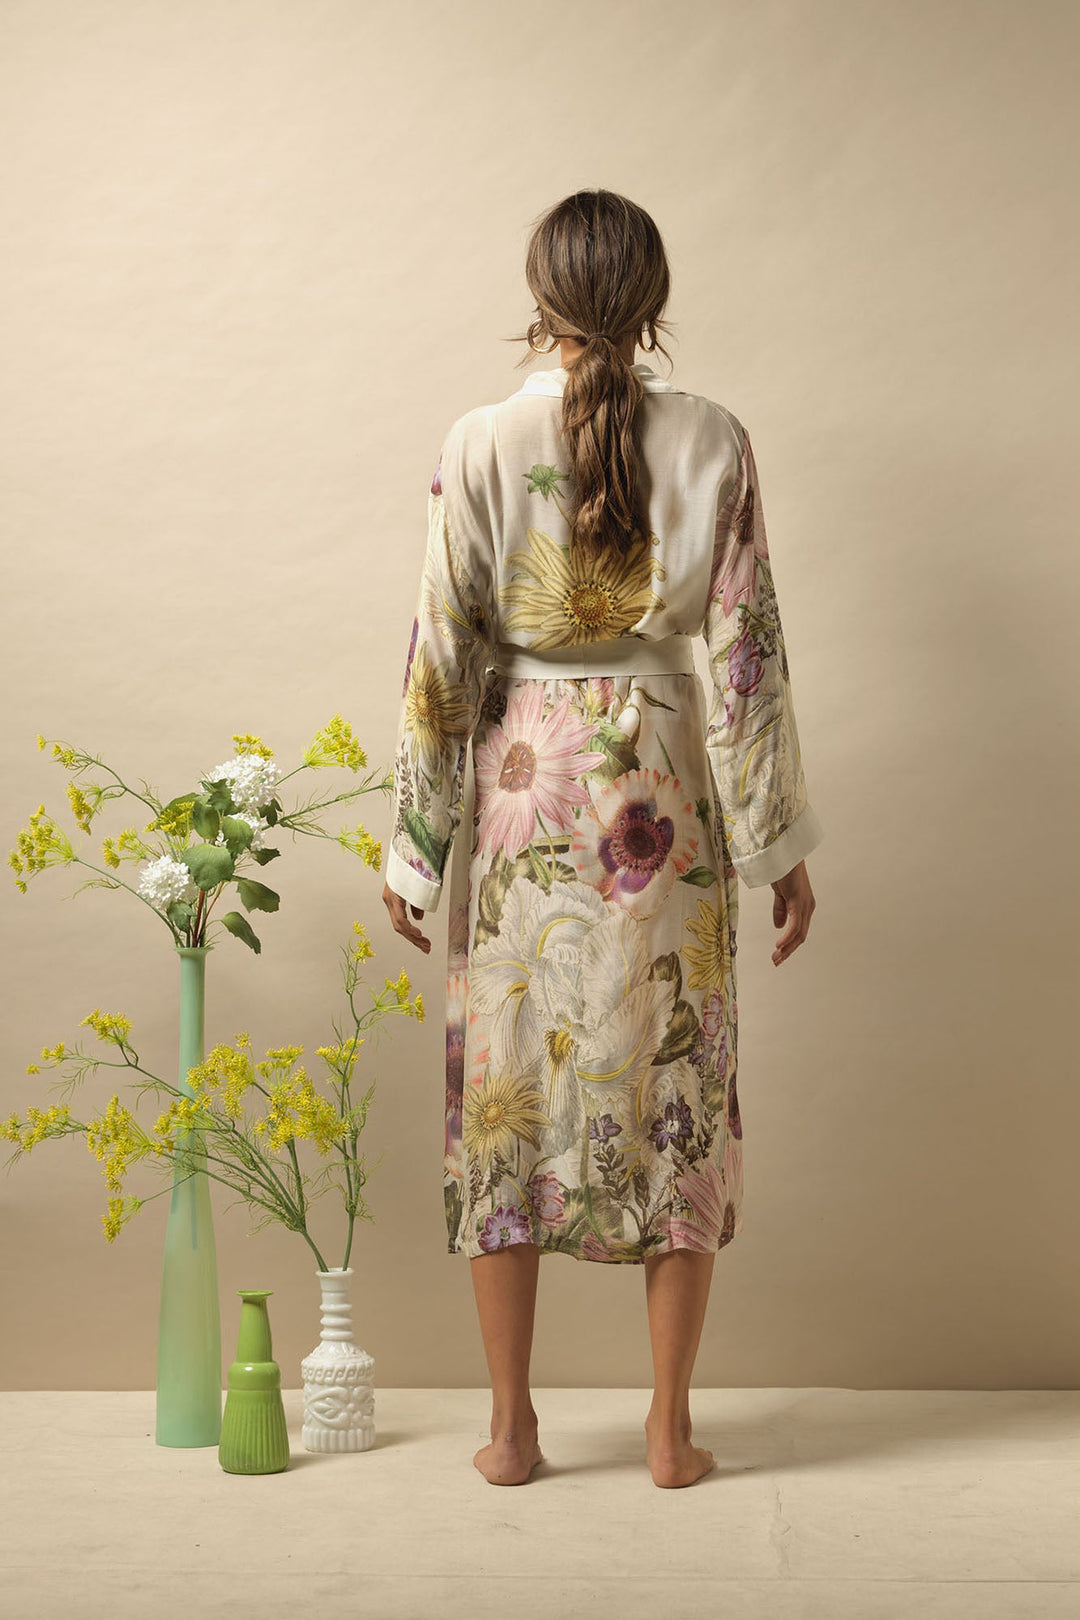 Women's lightweight radiant gown with Stone Daisy print by One Hundred Stars